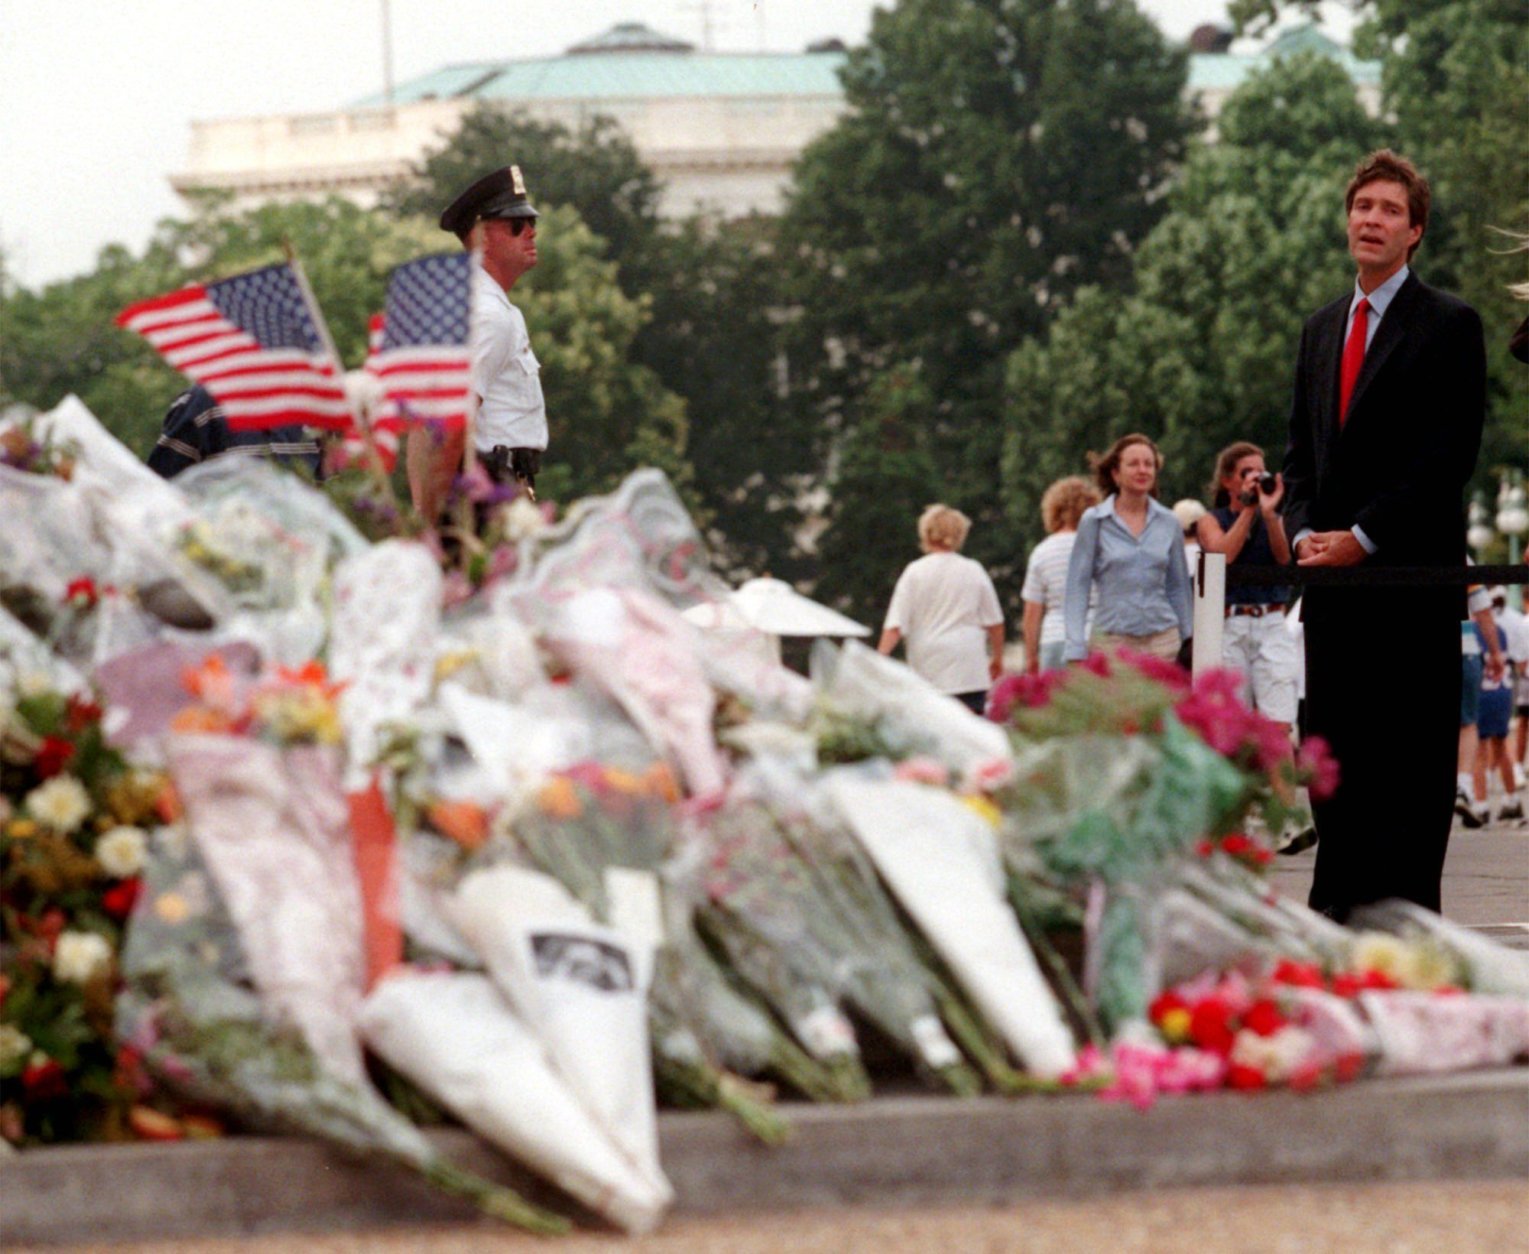 Sen. Bill Frist, R-Tenn. pauses at flowers on the steps of the Capitol Monday, July 27, 1998, placed there in honor of two Capitol police officers who were shot and killed Friday inside the Capitol. Frist, a heart surgeon, is credited with saving the suspect, Russell Eugene Weston Jr.'s life. (AP Photo/Khue Bui)